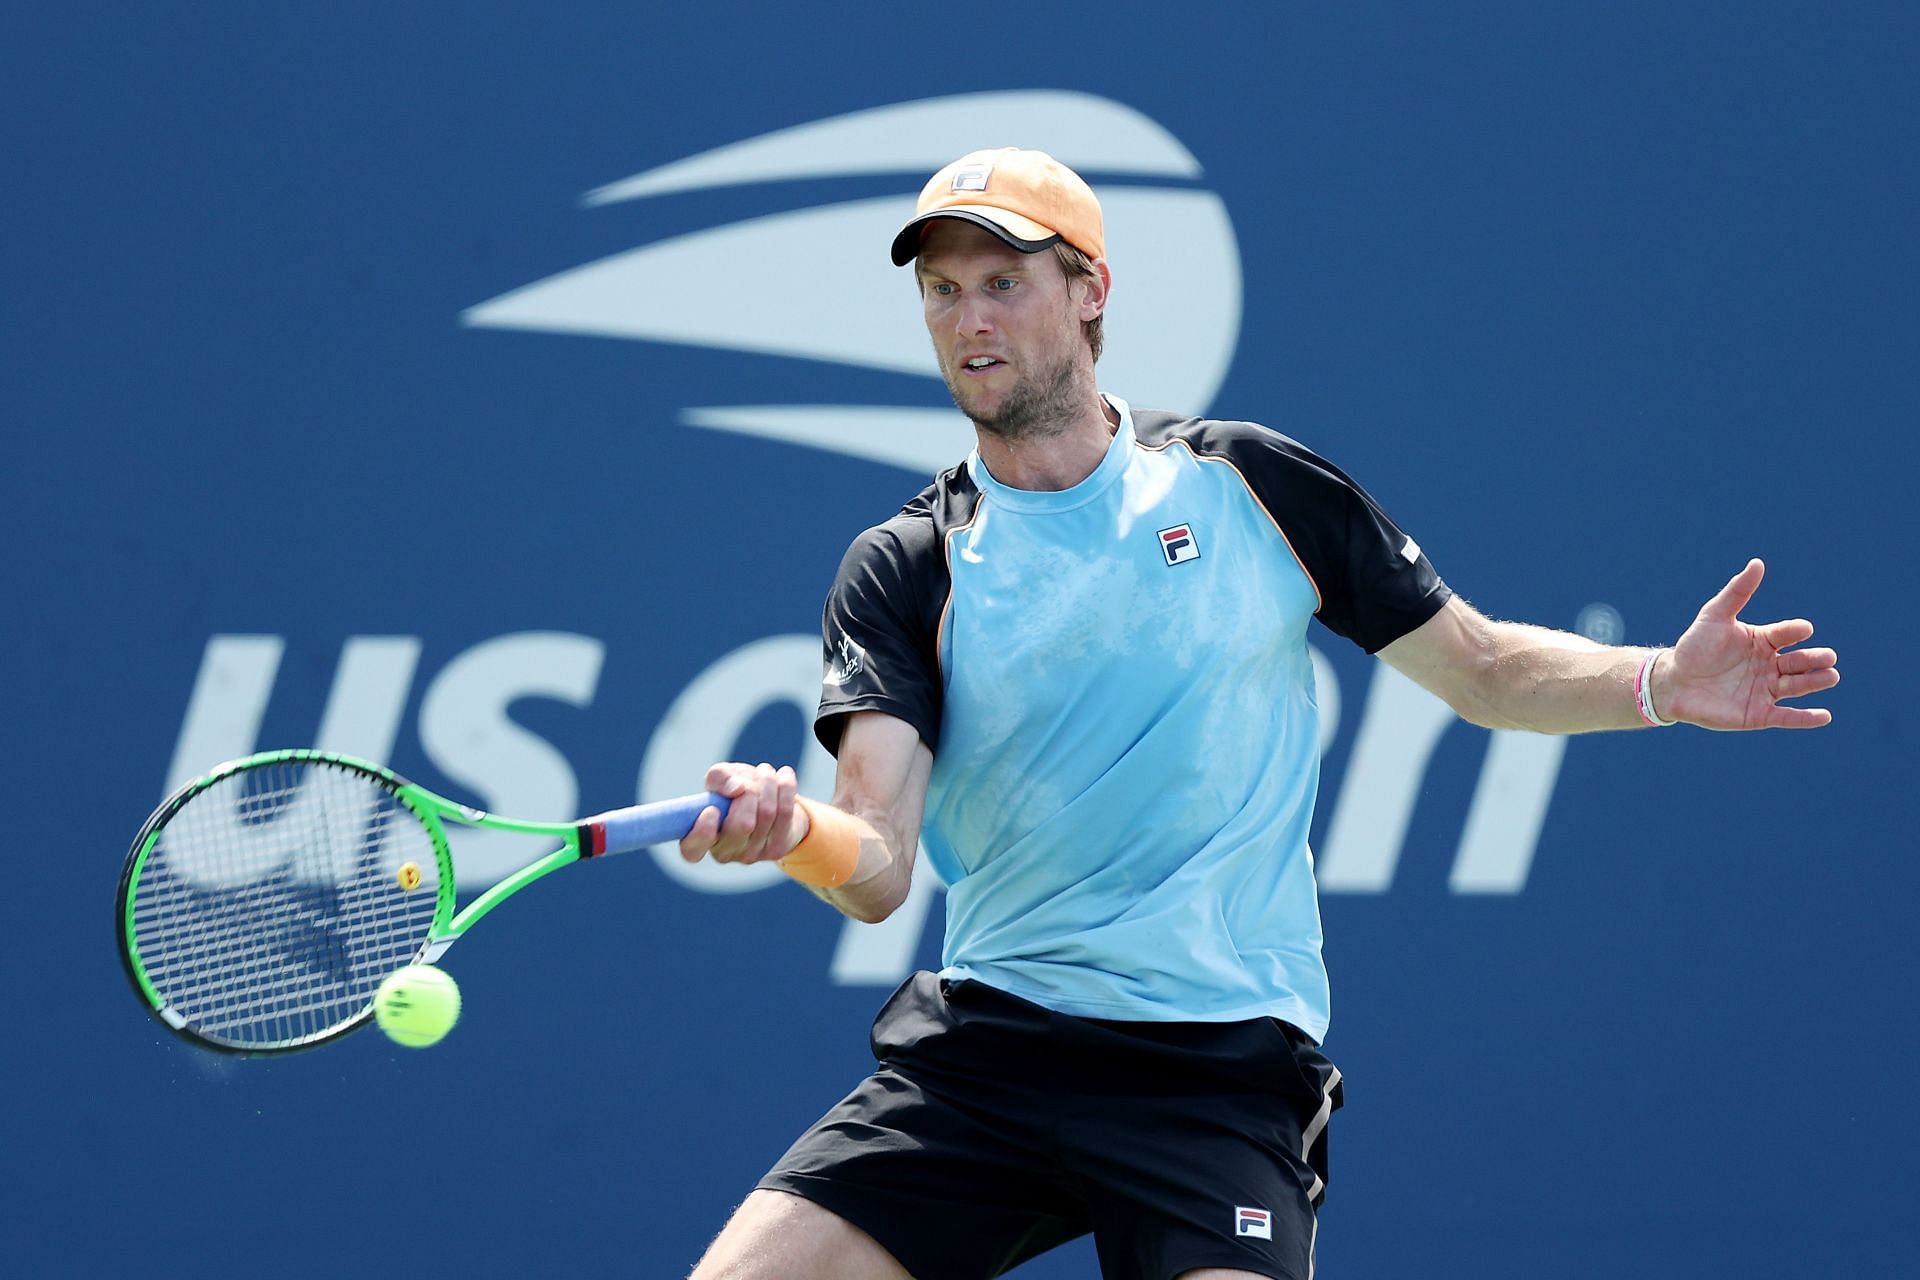 Andreas Seppi at the 2021 US Open.